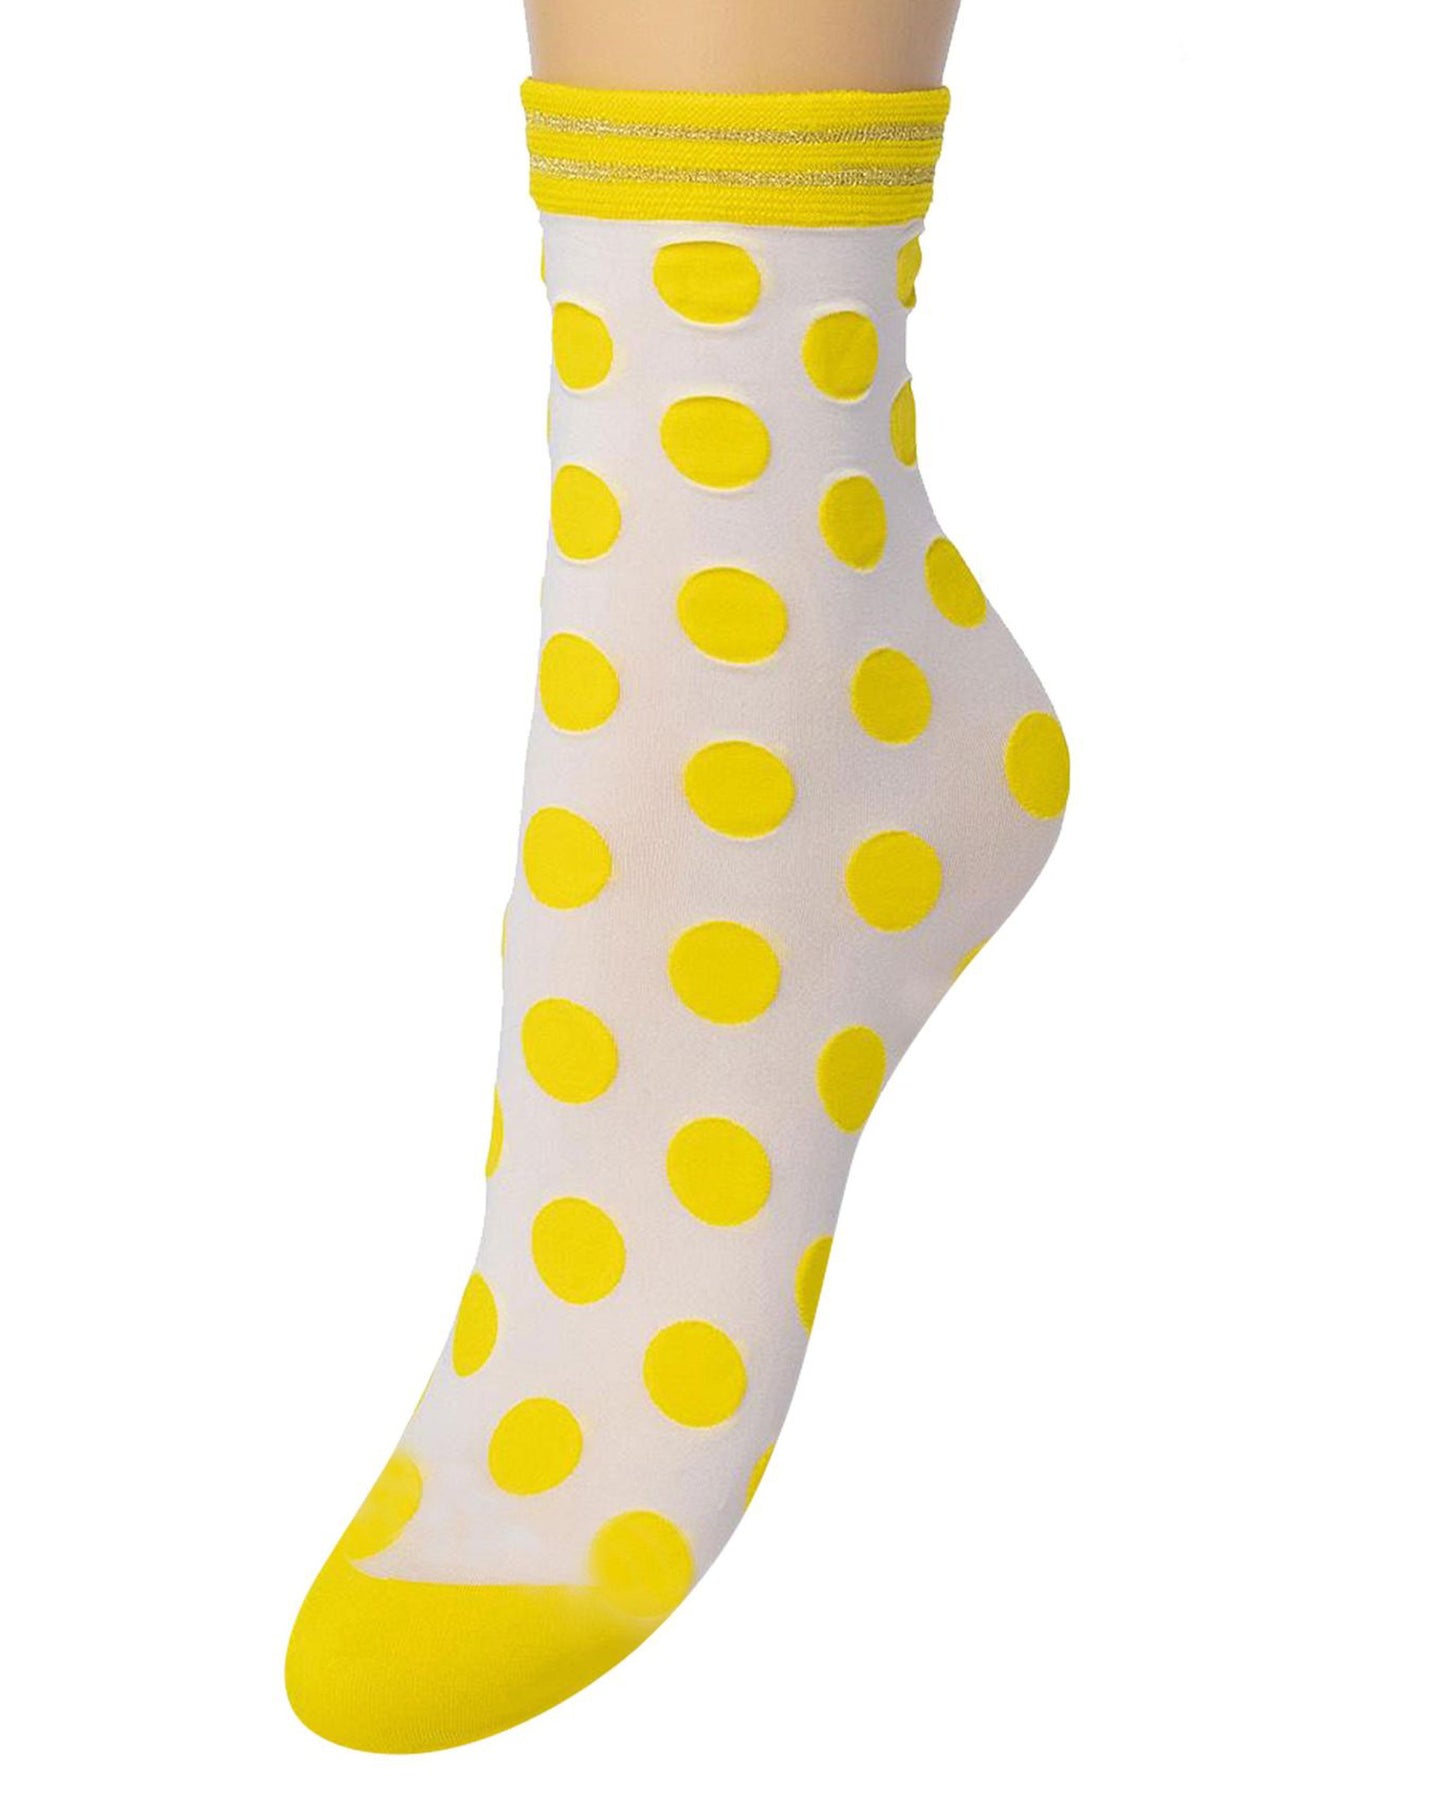 Bonnie Doon Big Dots Socks - White semi-opaque fashion ankle socks with a yellow polka dot pattern, reinforced toe and striped sparkly lurex cuff.